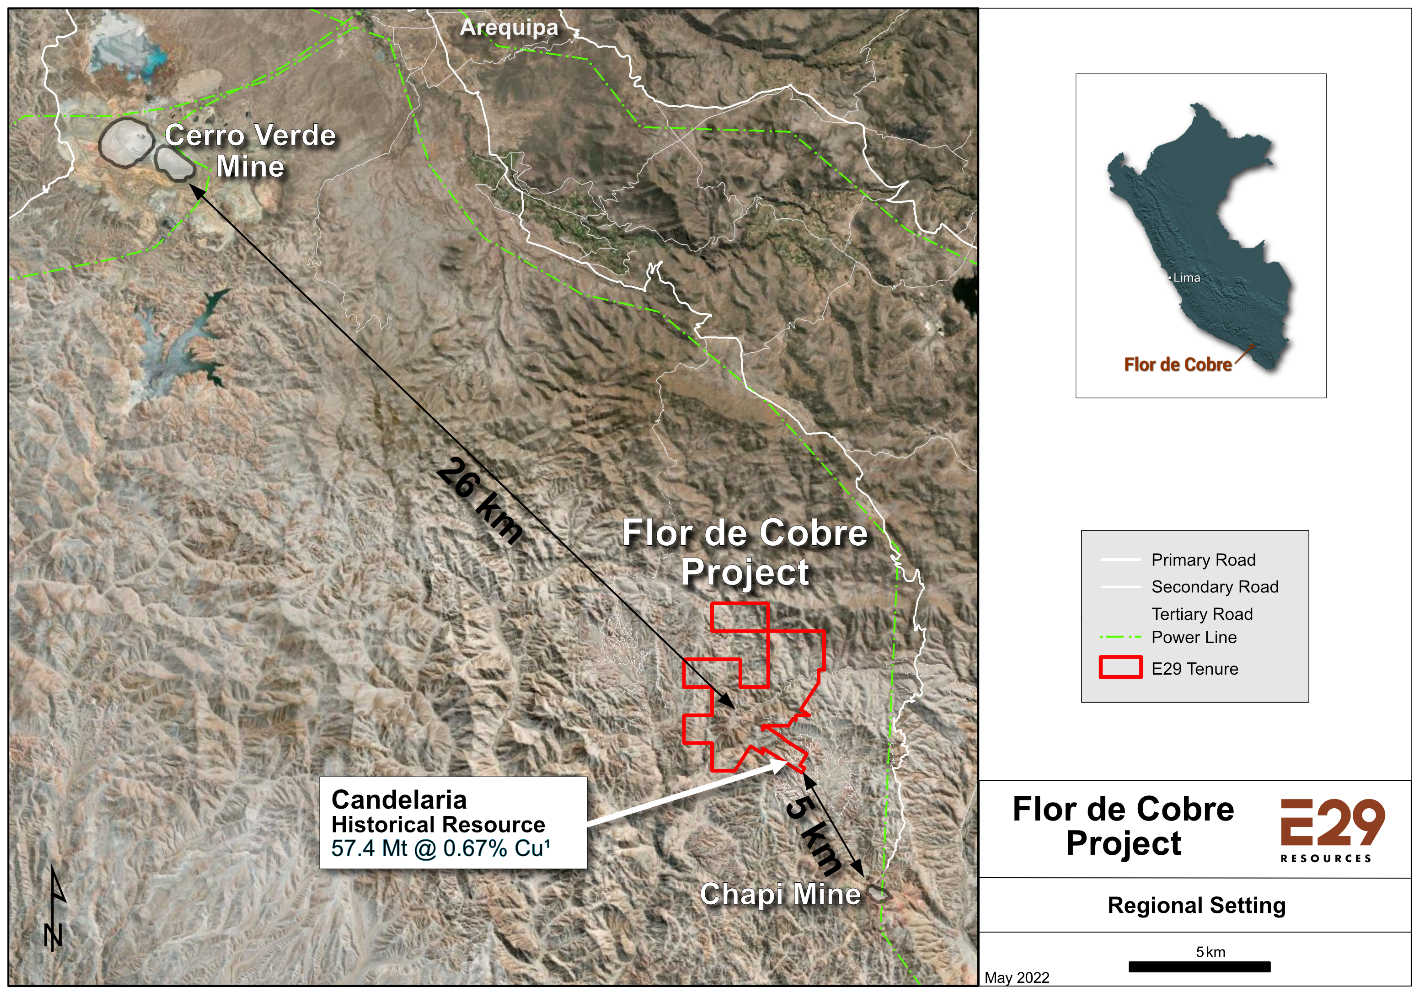 Regional setting of the Flor de Cobre Project is in the Southern Peru Copper Belt, between the Cerro Verde and Chapi mines. The project is at a moderate elevation of less than 2,700 m, is road accessible, and is close to excellent infrastructure for mine development and operation.